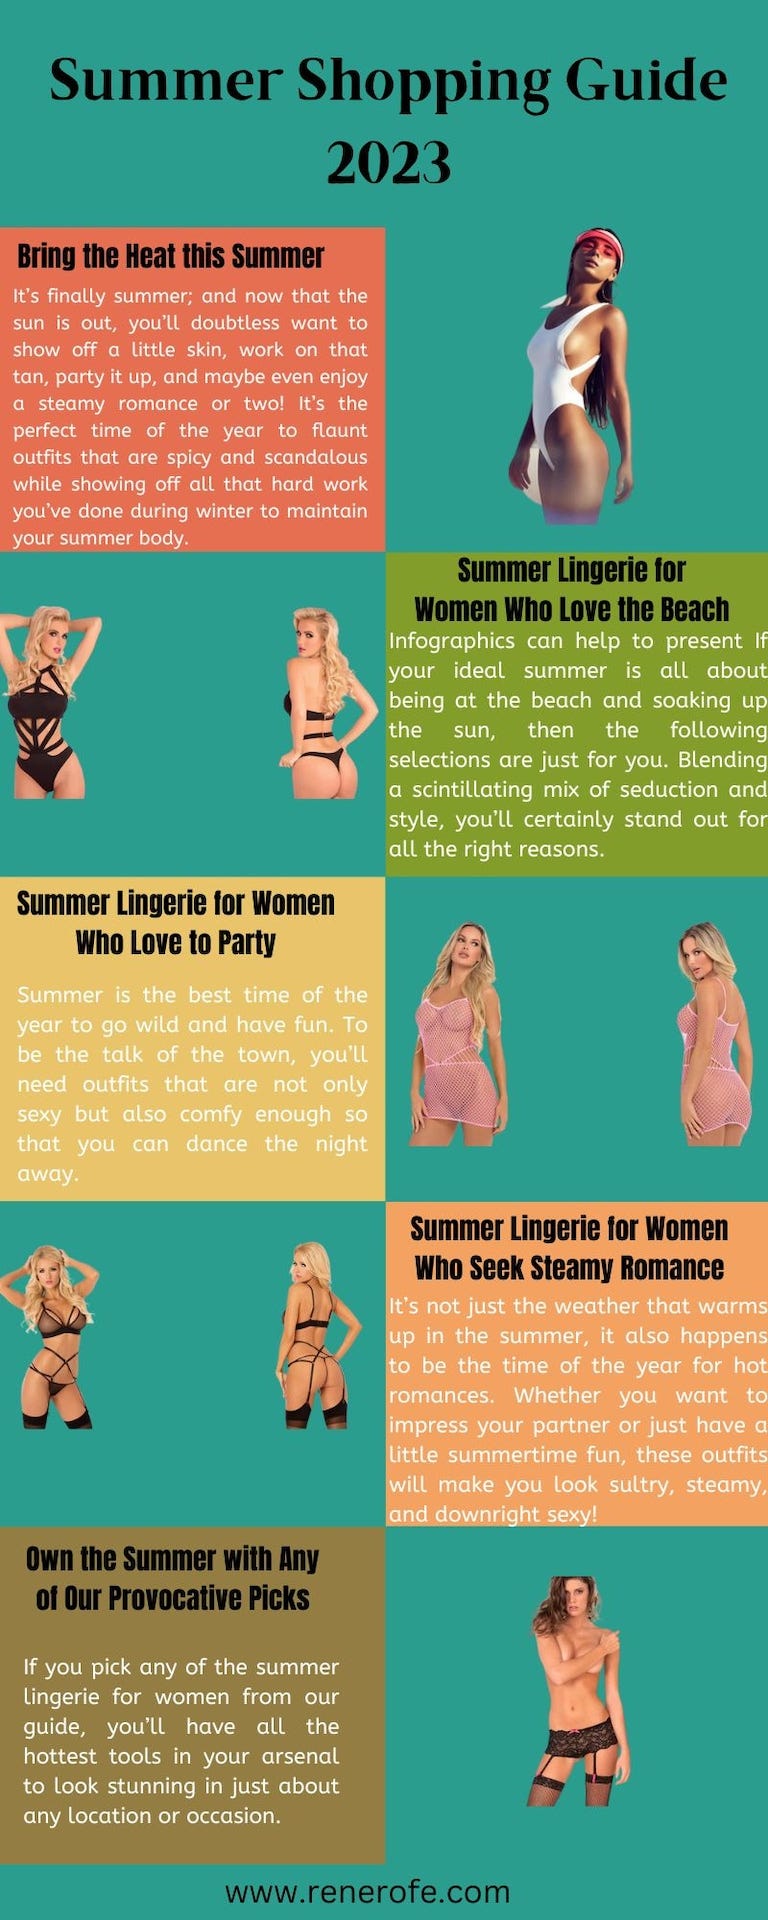 Your Guide to Different Lingerie Types From A-Z